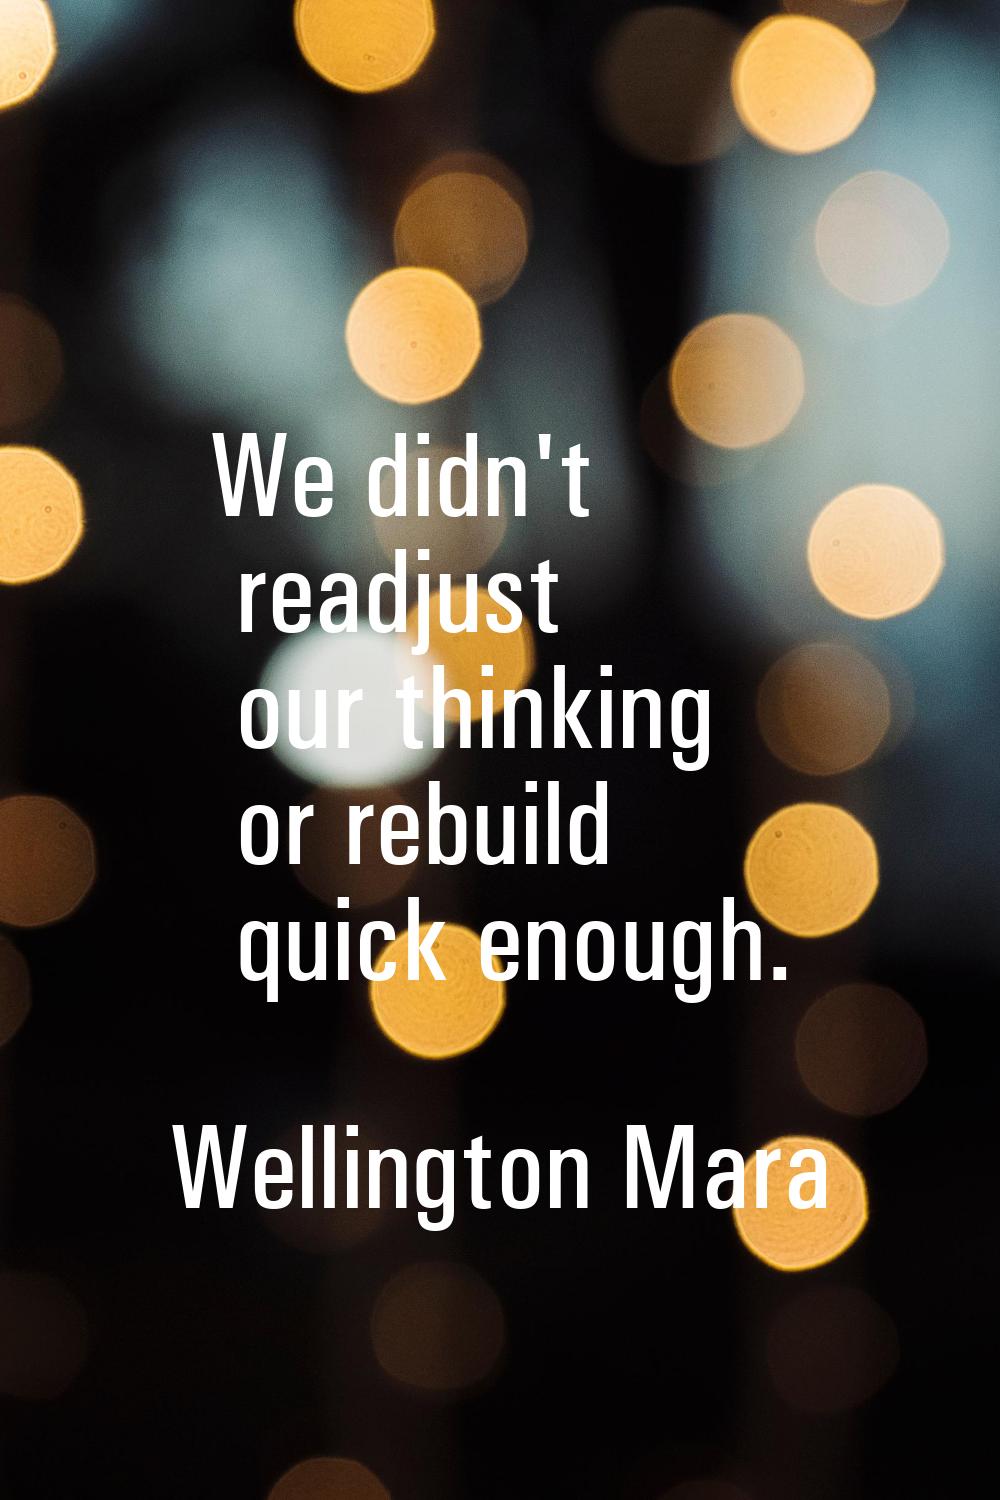 We didn't readjust our thinking or rebuild quick enough.